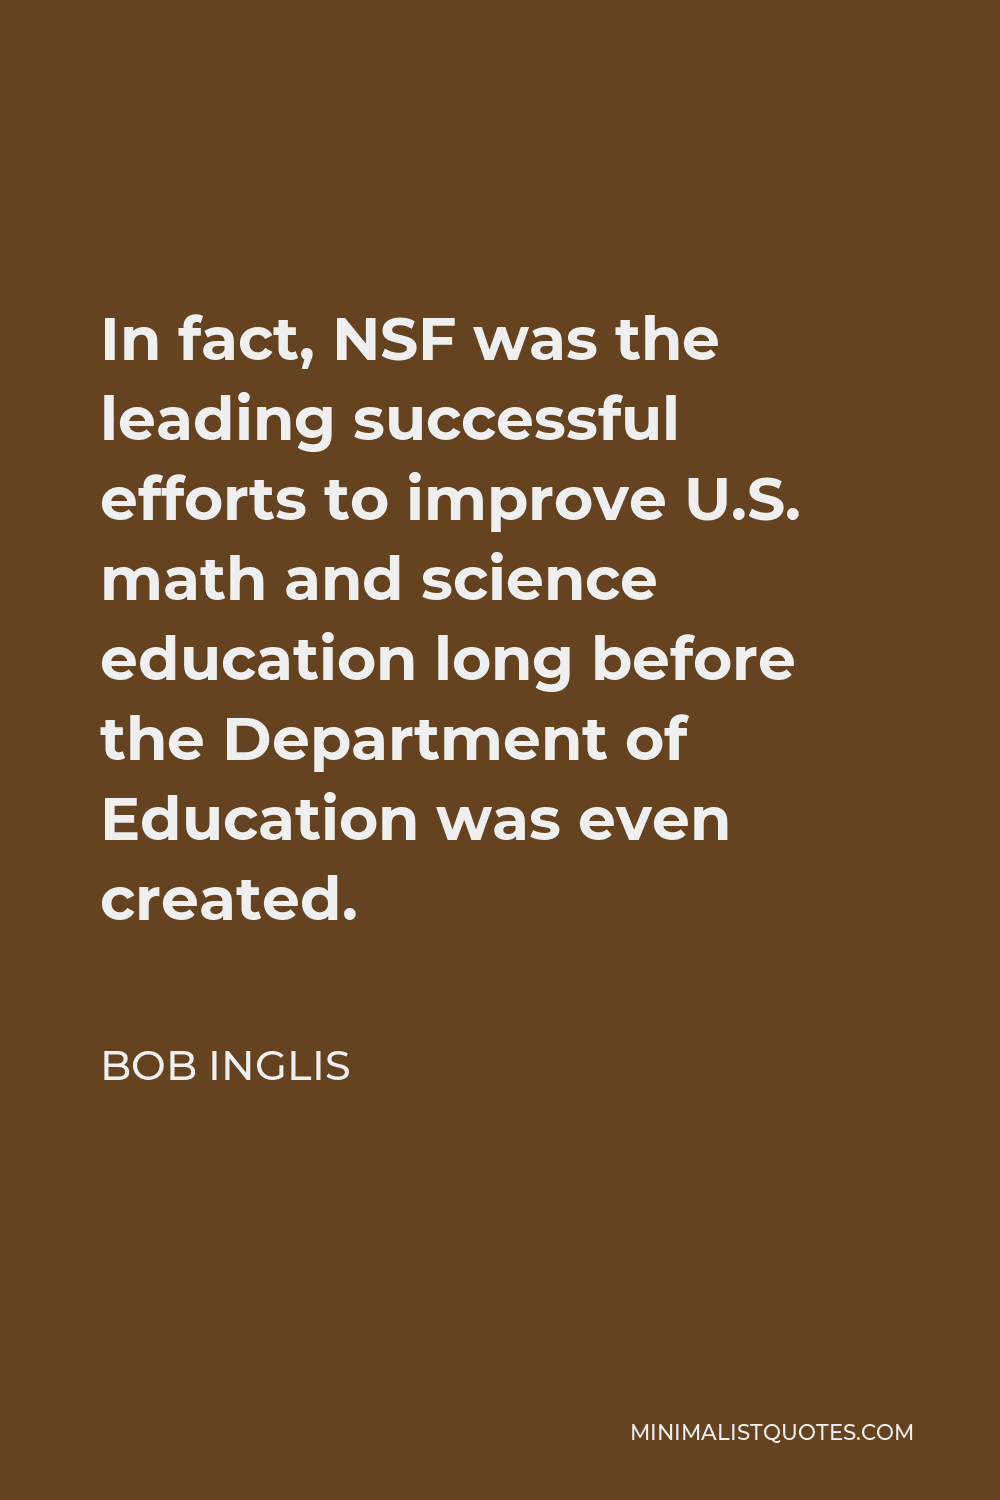 Bob Inglis Quote - In fact, NSF was the leading successful efforts to improve U.S. math and science education long before the Department of Education was even created.